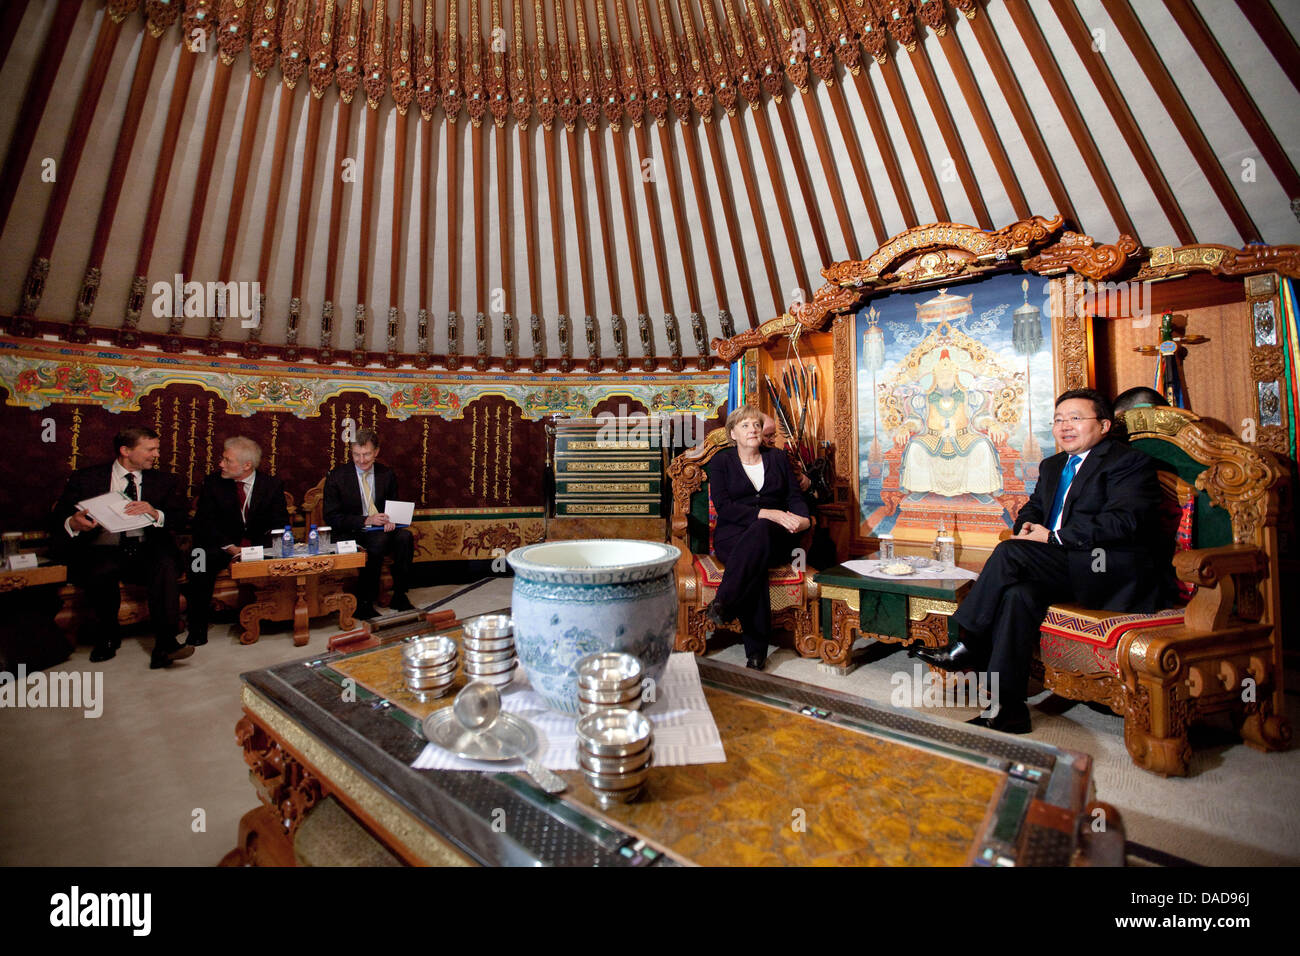 German Chancellor Angela Merkel meets President of Mongolia Tsakhia  Elbegdorj in the state yurt situated in the fourth floor of the government  building in Ulan Bator, Mongolia, 13 October 2011. Merkel intends